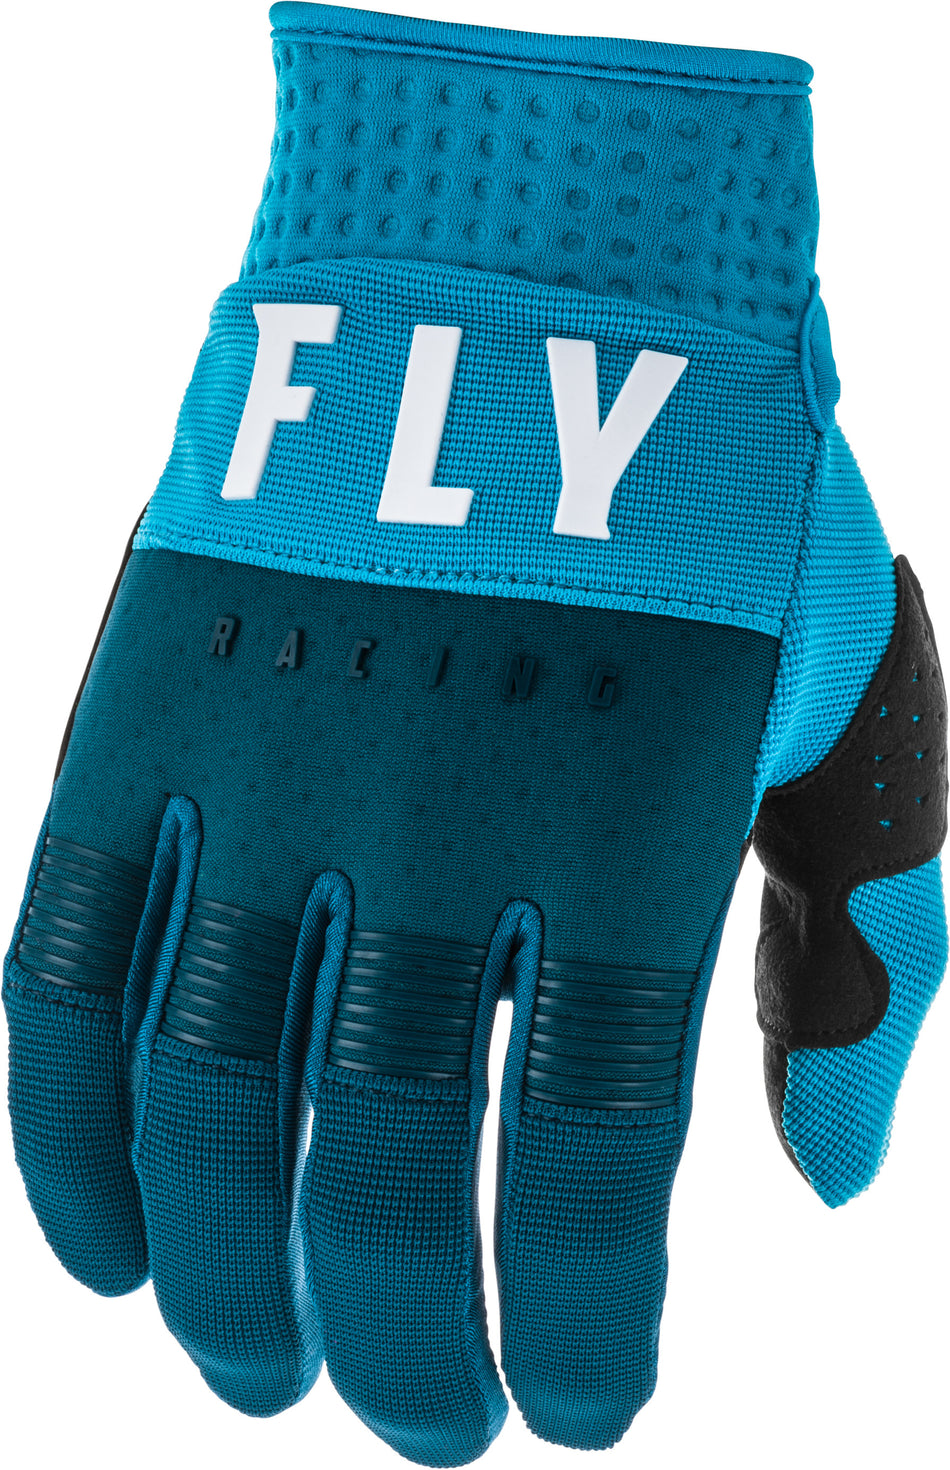 FLY RACING F-16 Gloves Navy/Blue/White Sz 05 373-91105